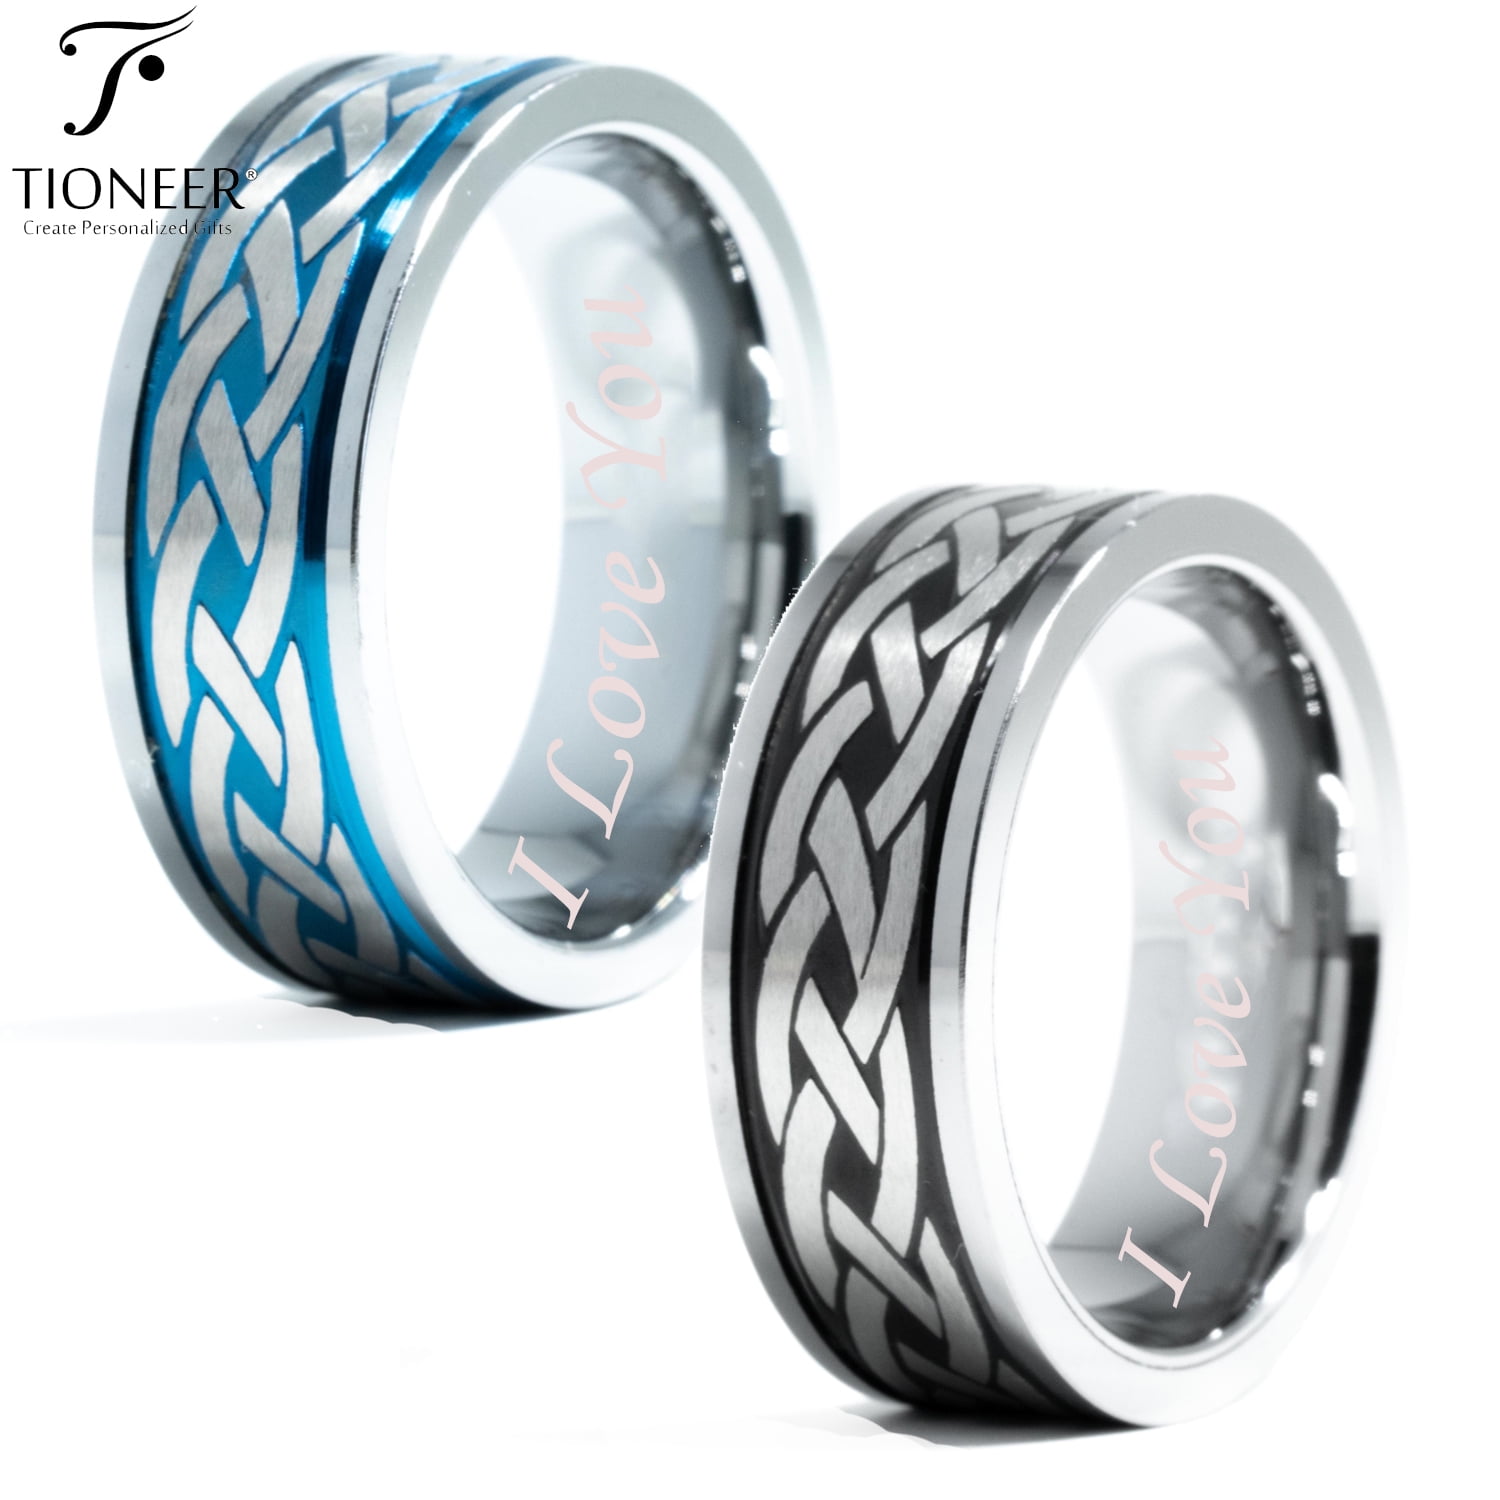 Sterling Silver Woman's Men's Dragon Engraved Ring Unique Band 6mm Sizes 5-16 